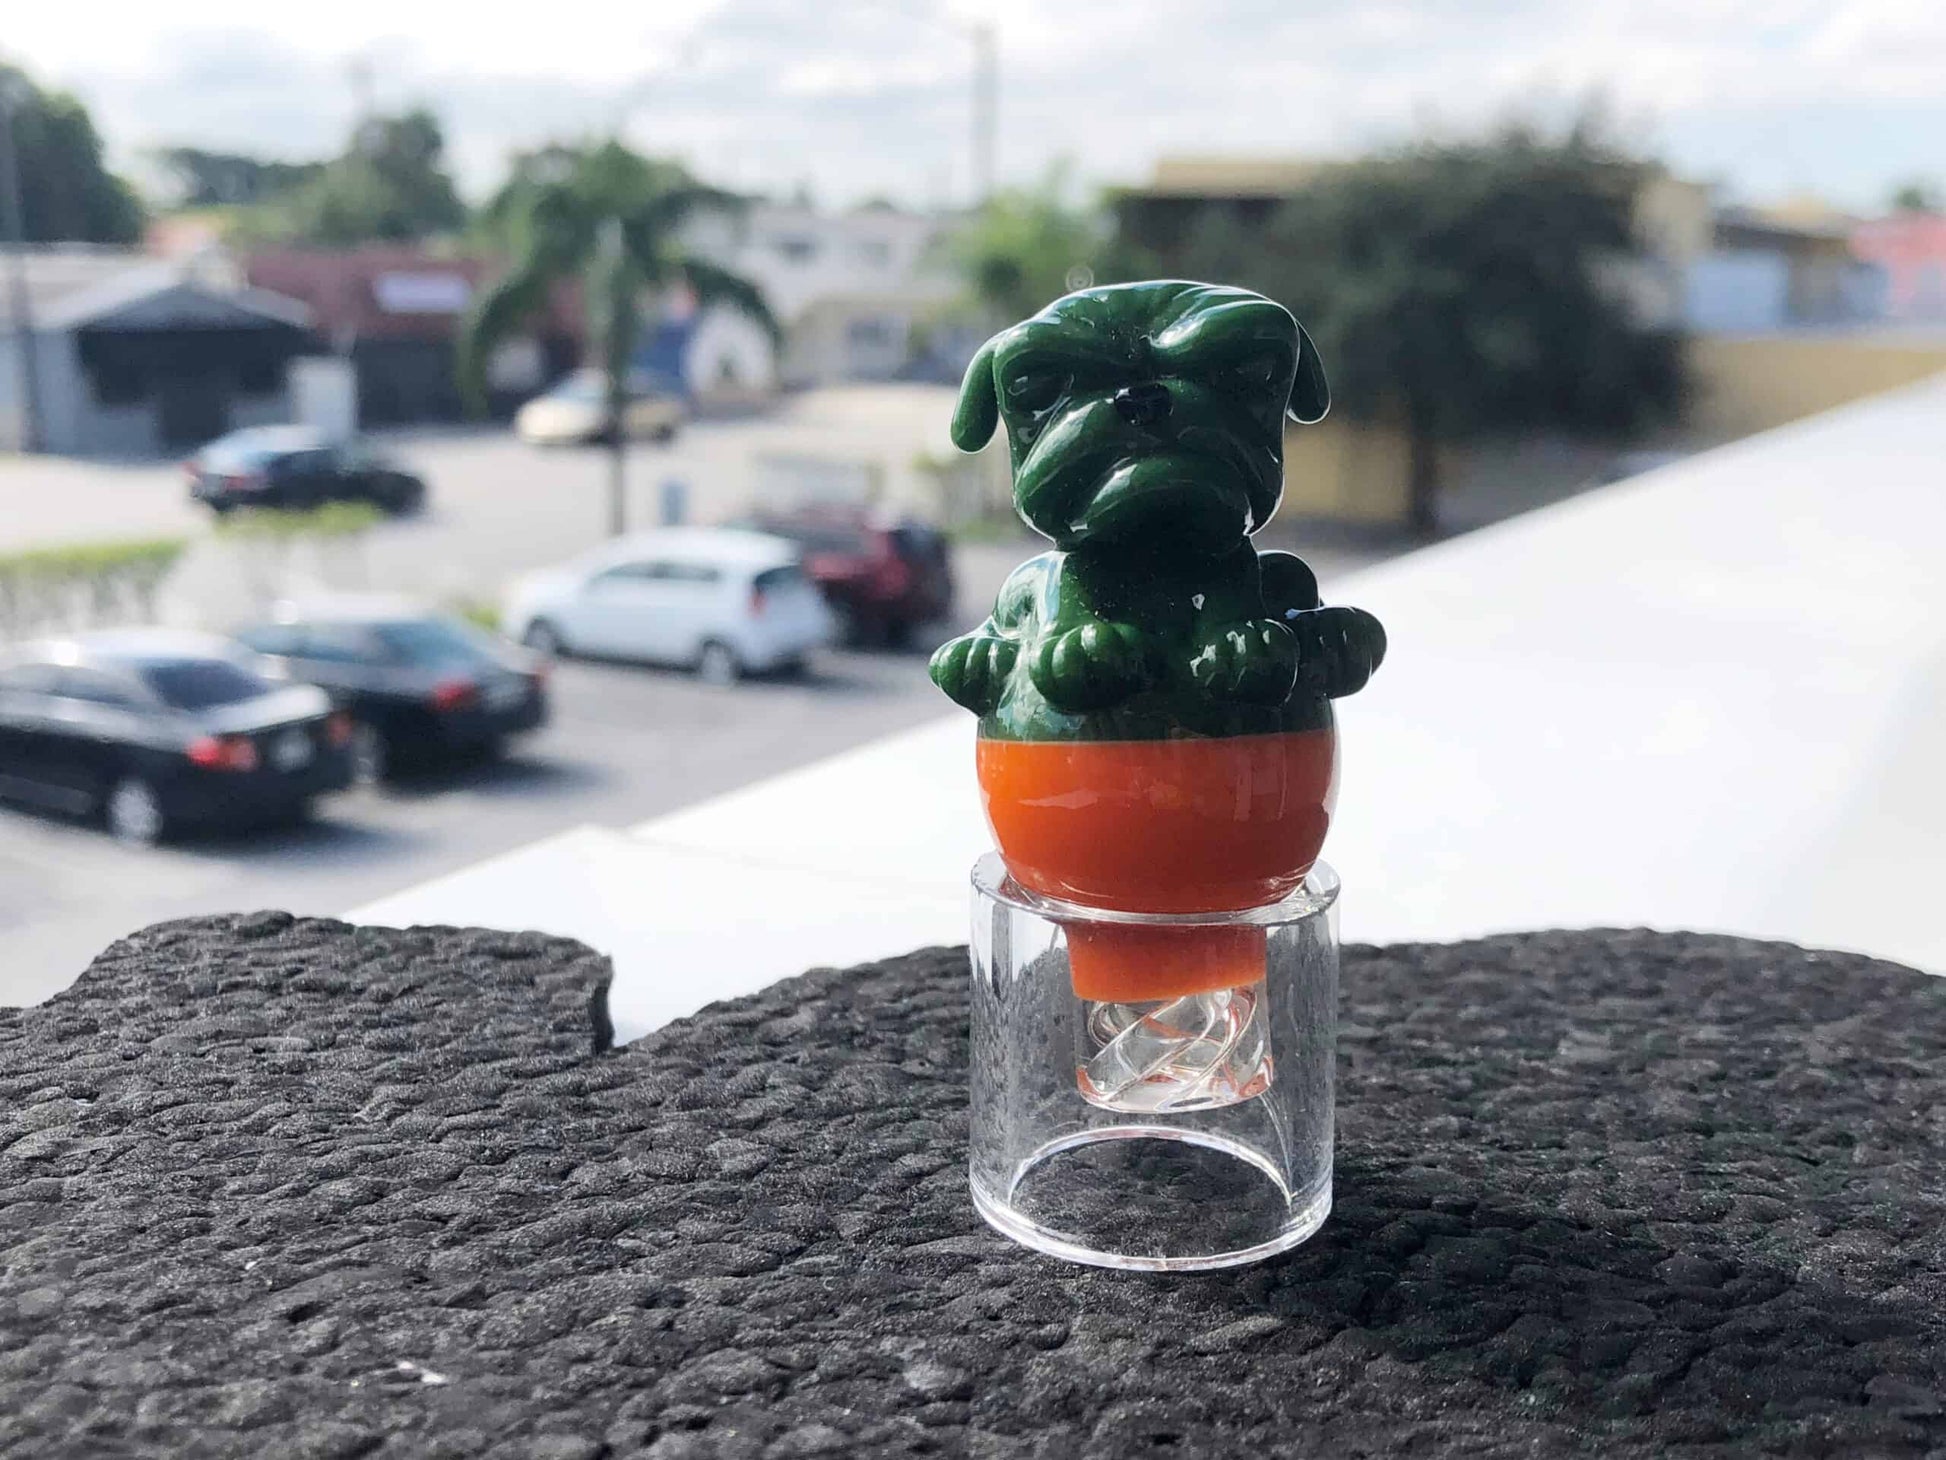 exclusive design of the Miami Orange/Green Bullie Spinner Carb Cap by Swanny